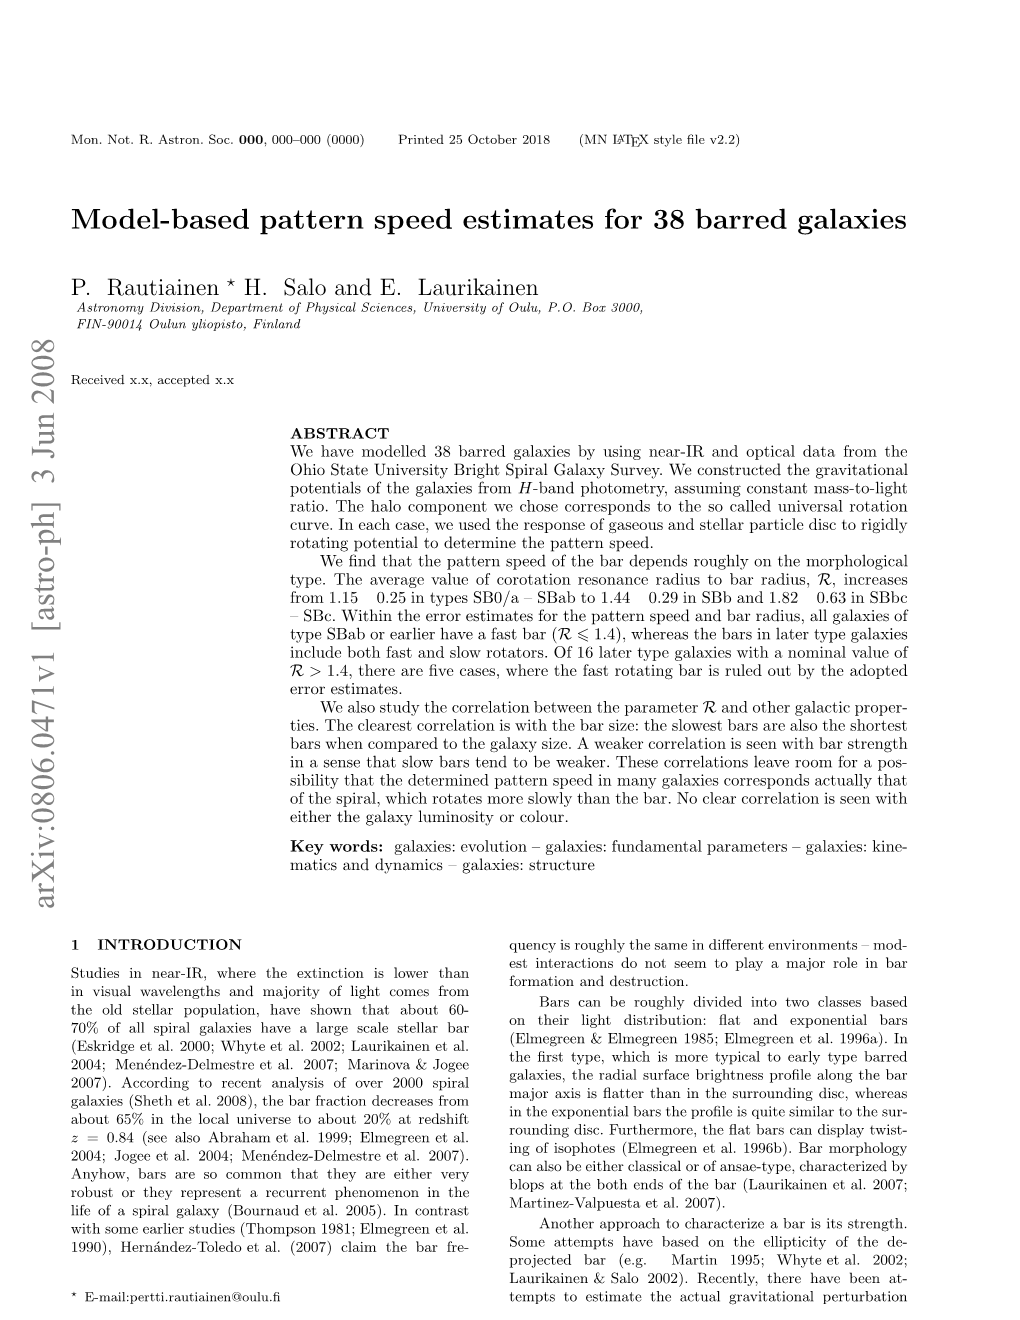 Model-Based Pattern Speed Estimates for 38 Barred Galaxies